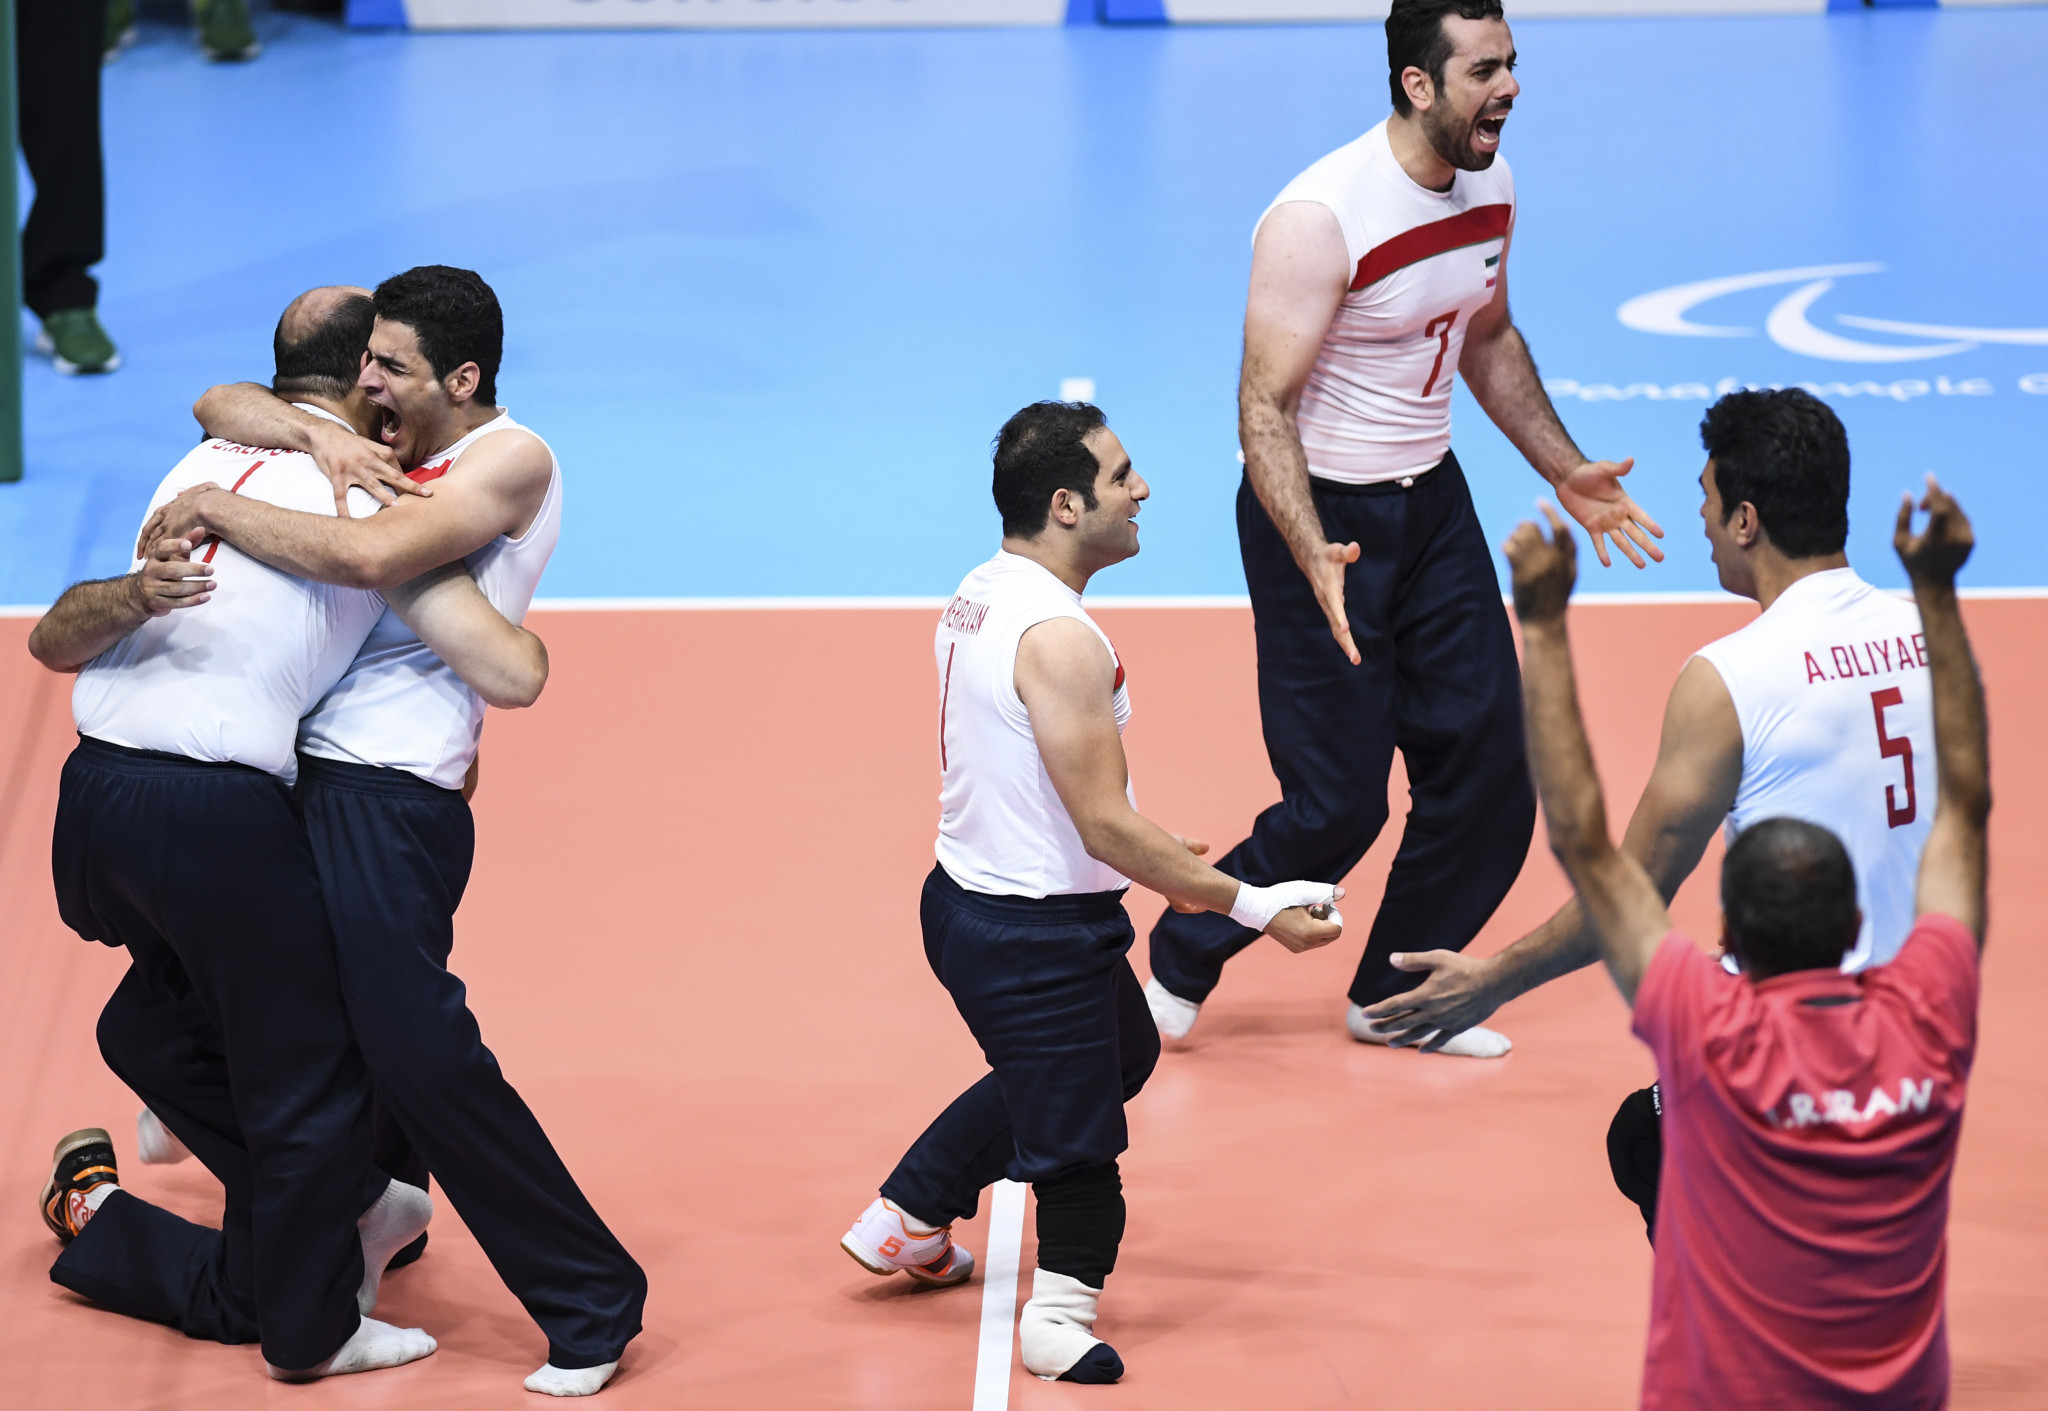 Hadi Rezaei is due to coach Iran's men's sitting volleyball team at Tokyo 2020 where they will hope to defend their Paralympic title ©Getty Images